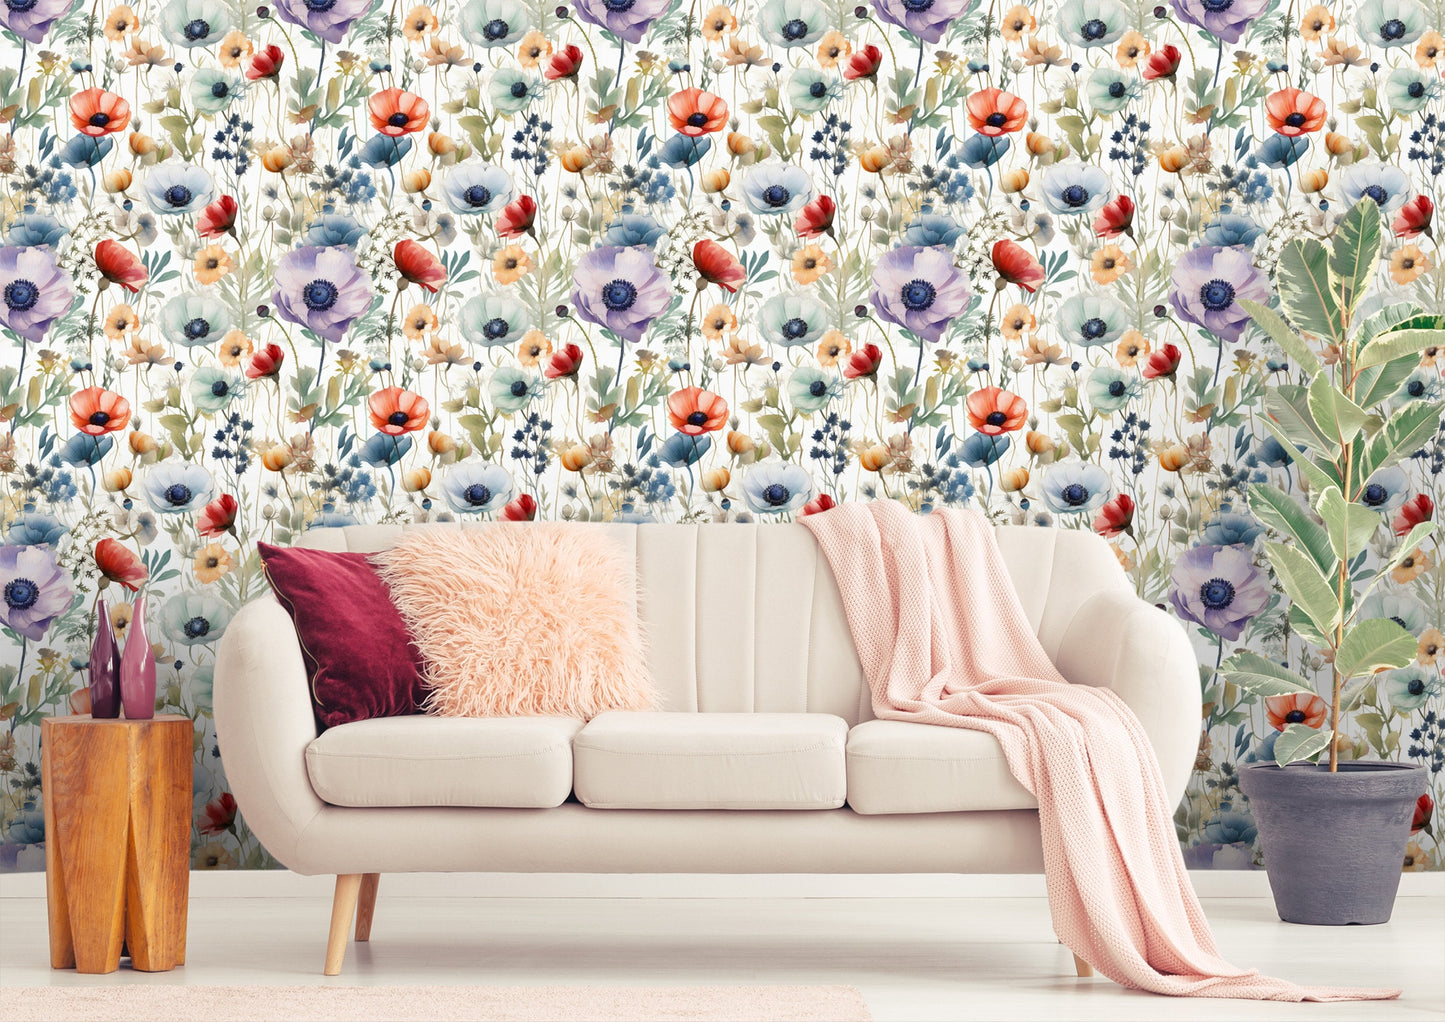 Wild Floral Wallpaper | Watercolor Flowers for kids room by Miami Walls and Decor | Peel & Stick Wallpaper, Removable and Renter Friendly